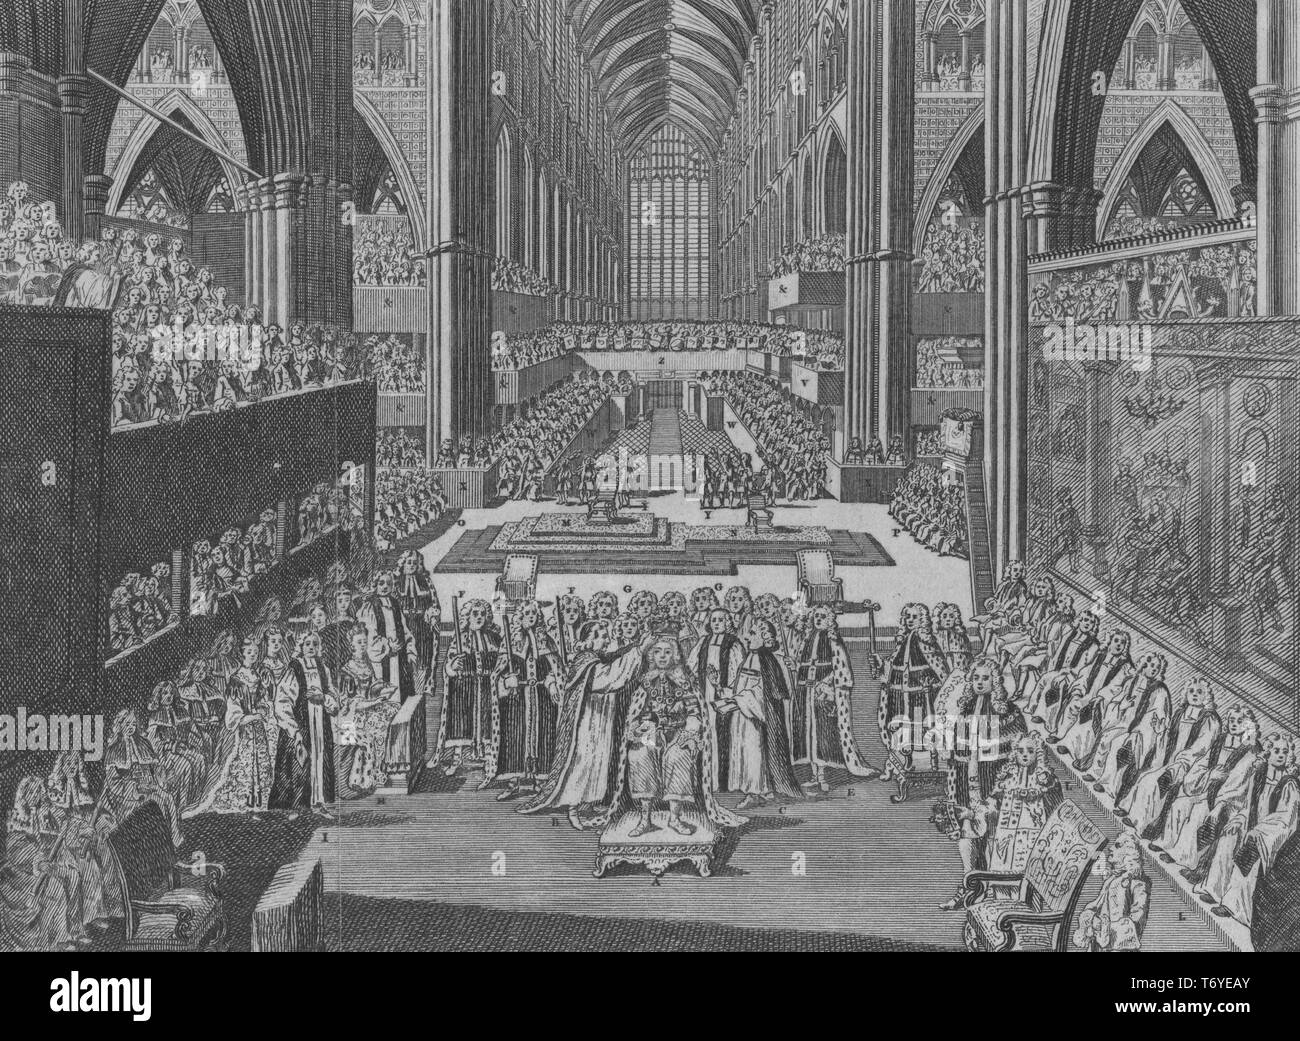 Engraving of his Majesty's crowning at Westminster Abbey, viewed from the high altar to the west end, City of Westminster, London, England, 1761. From the New York Public Library. () Stock Photo